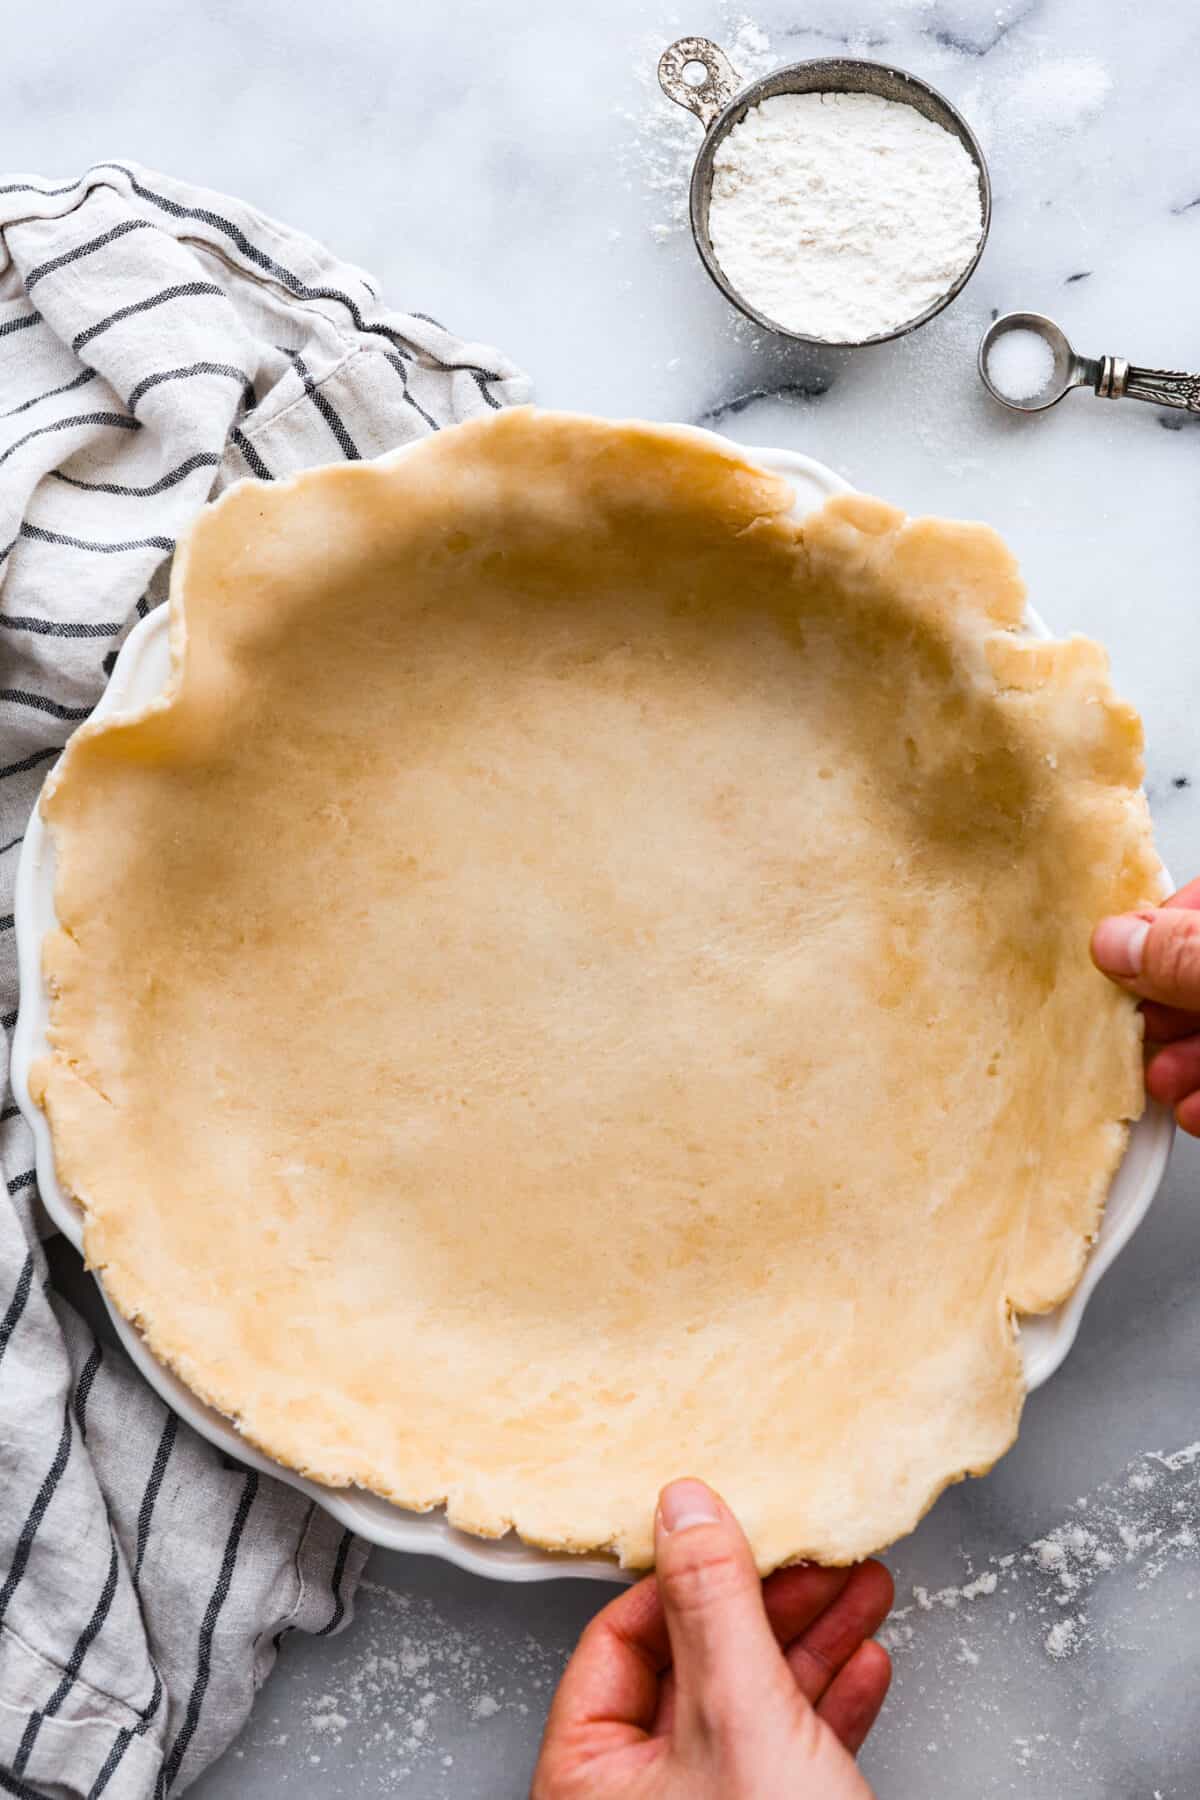 Placing a homemade, unbaked crust in a pie pan.